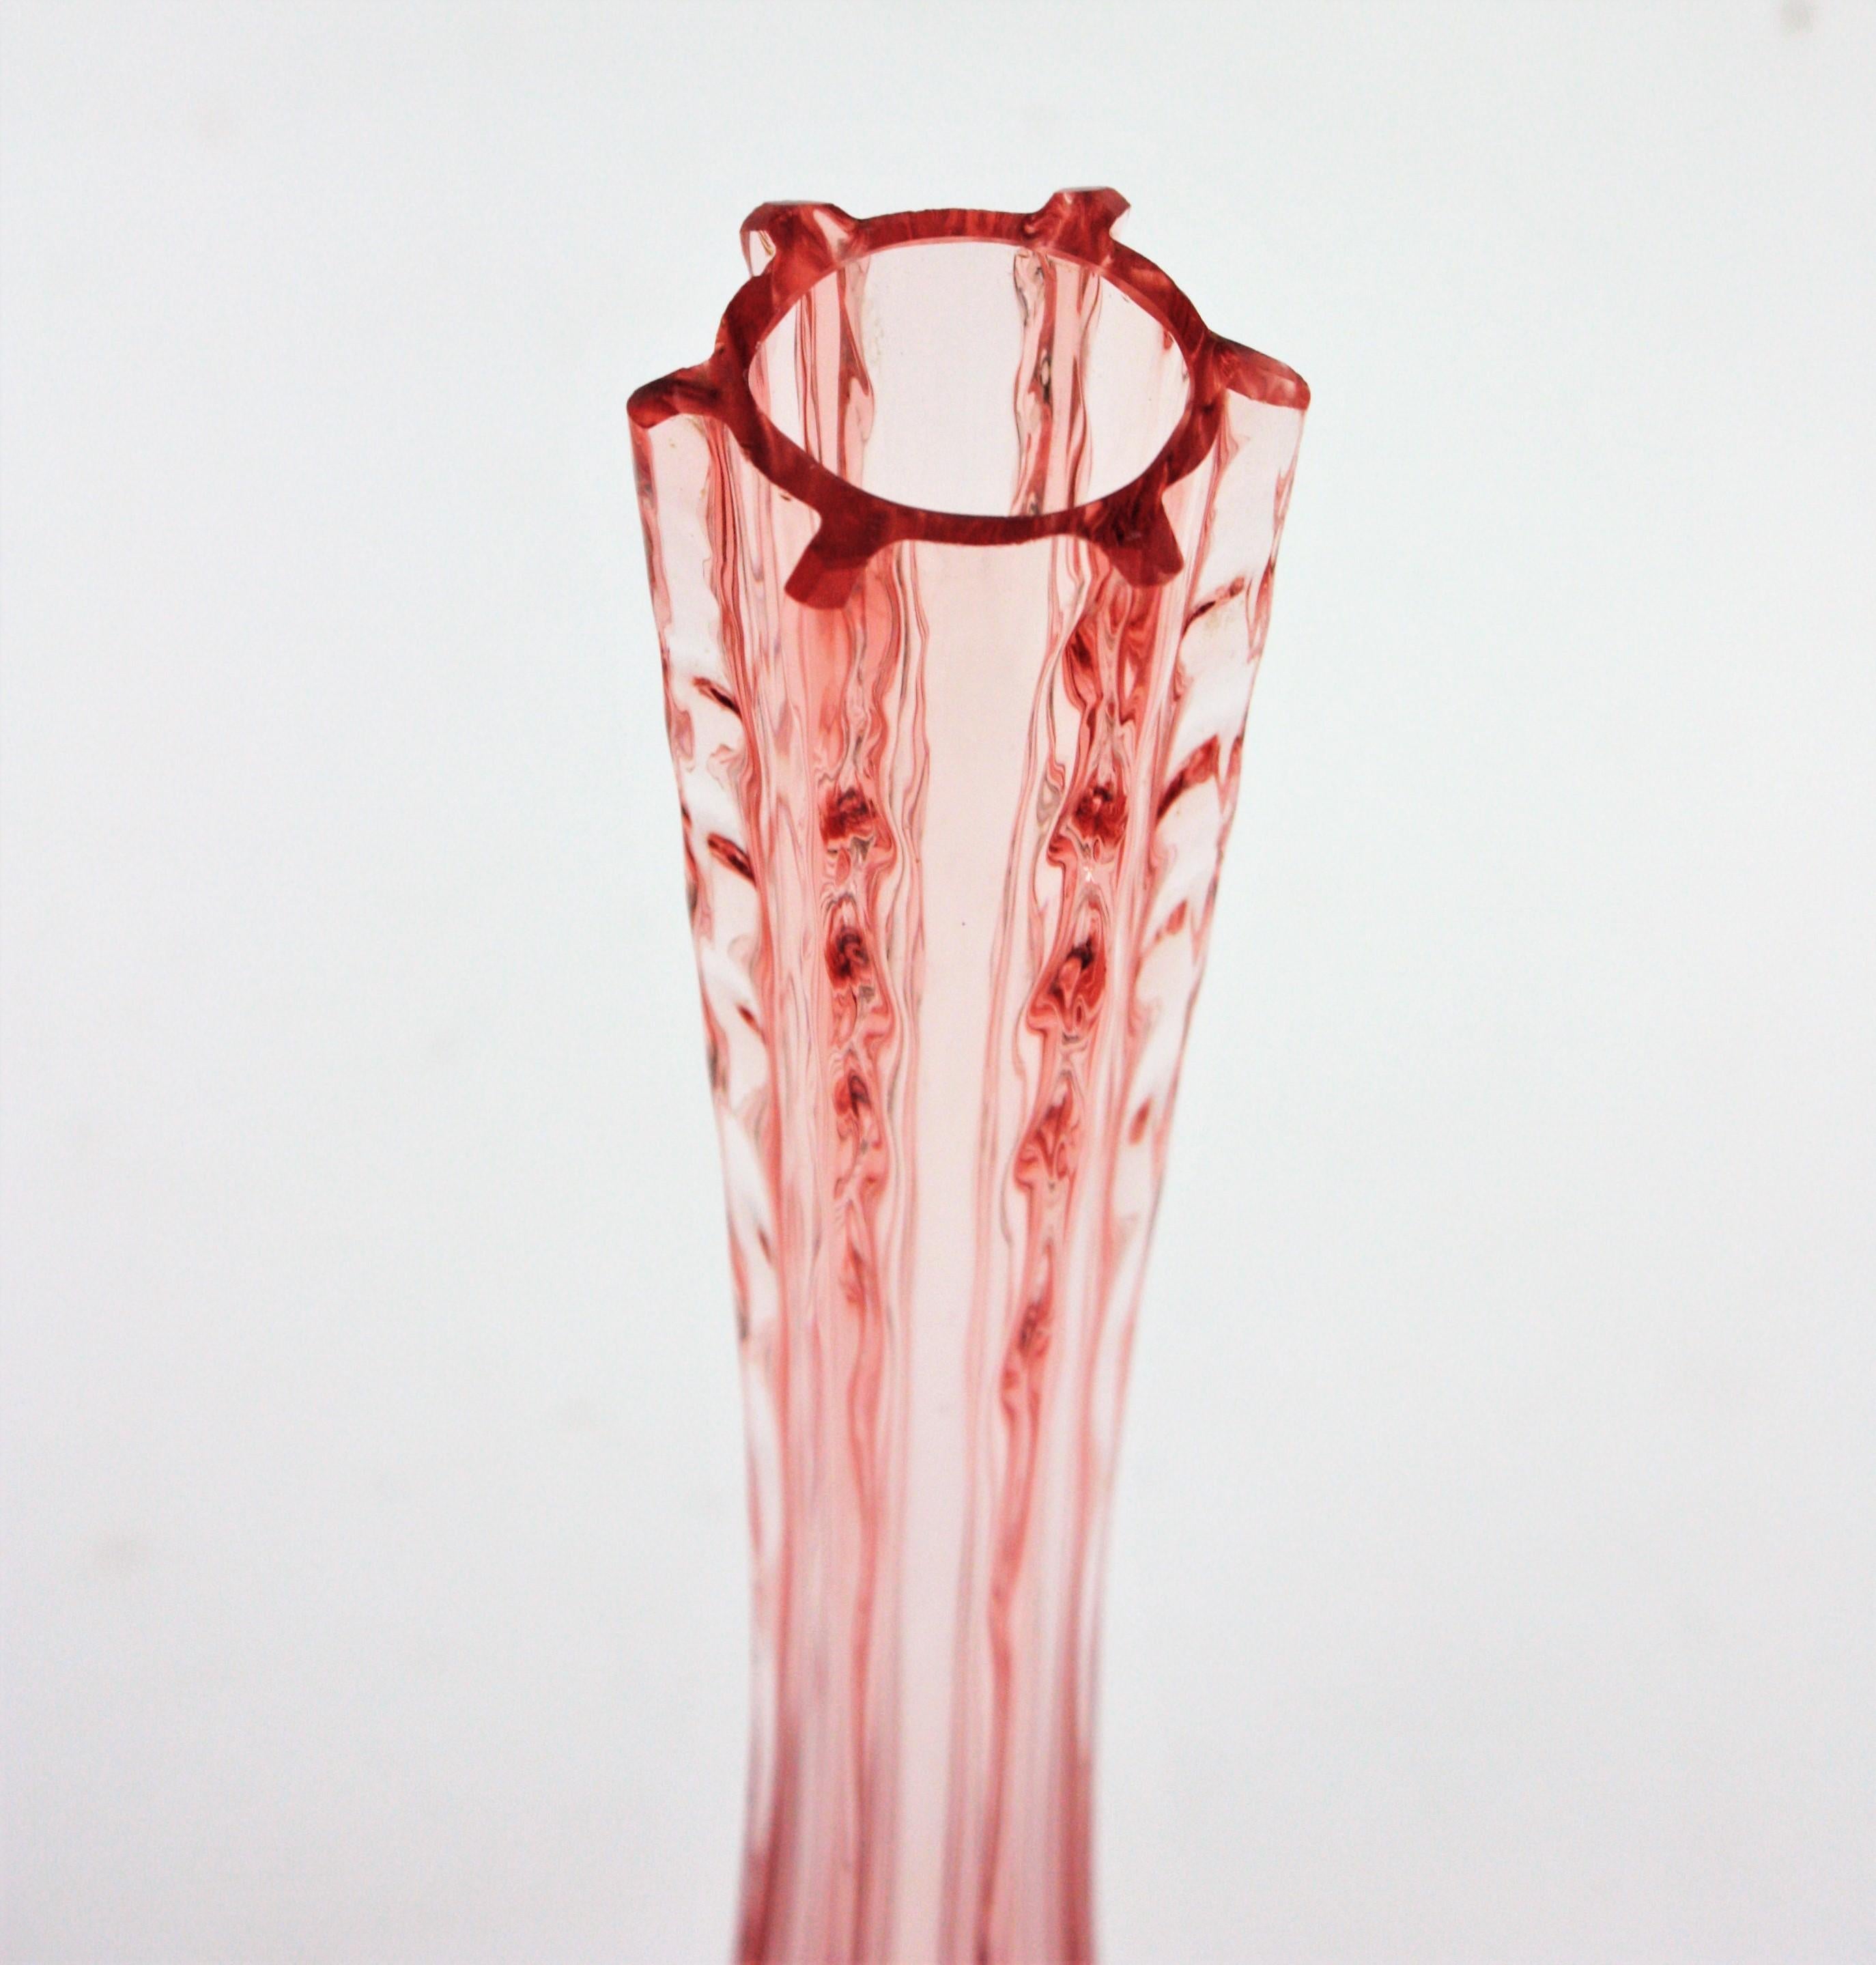 French Art Deco Blown Glass Pink Amberina Single Flower Vase For Sale 2